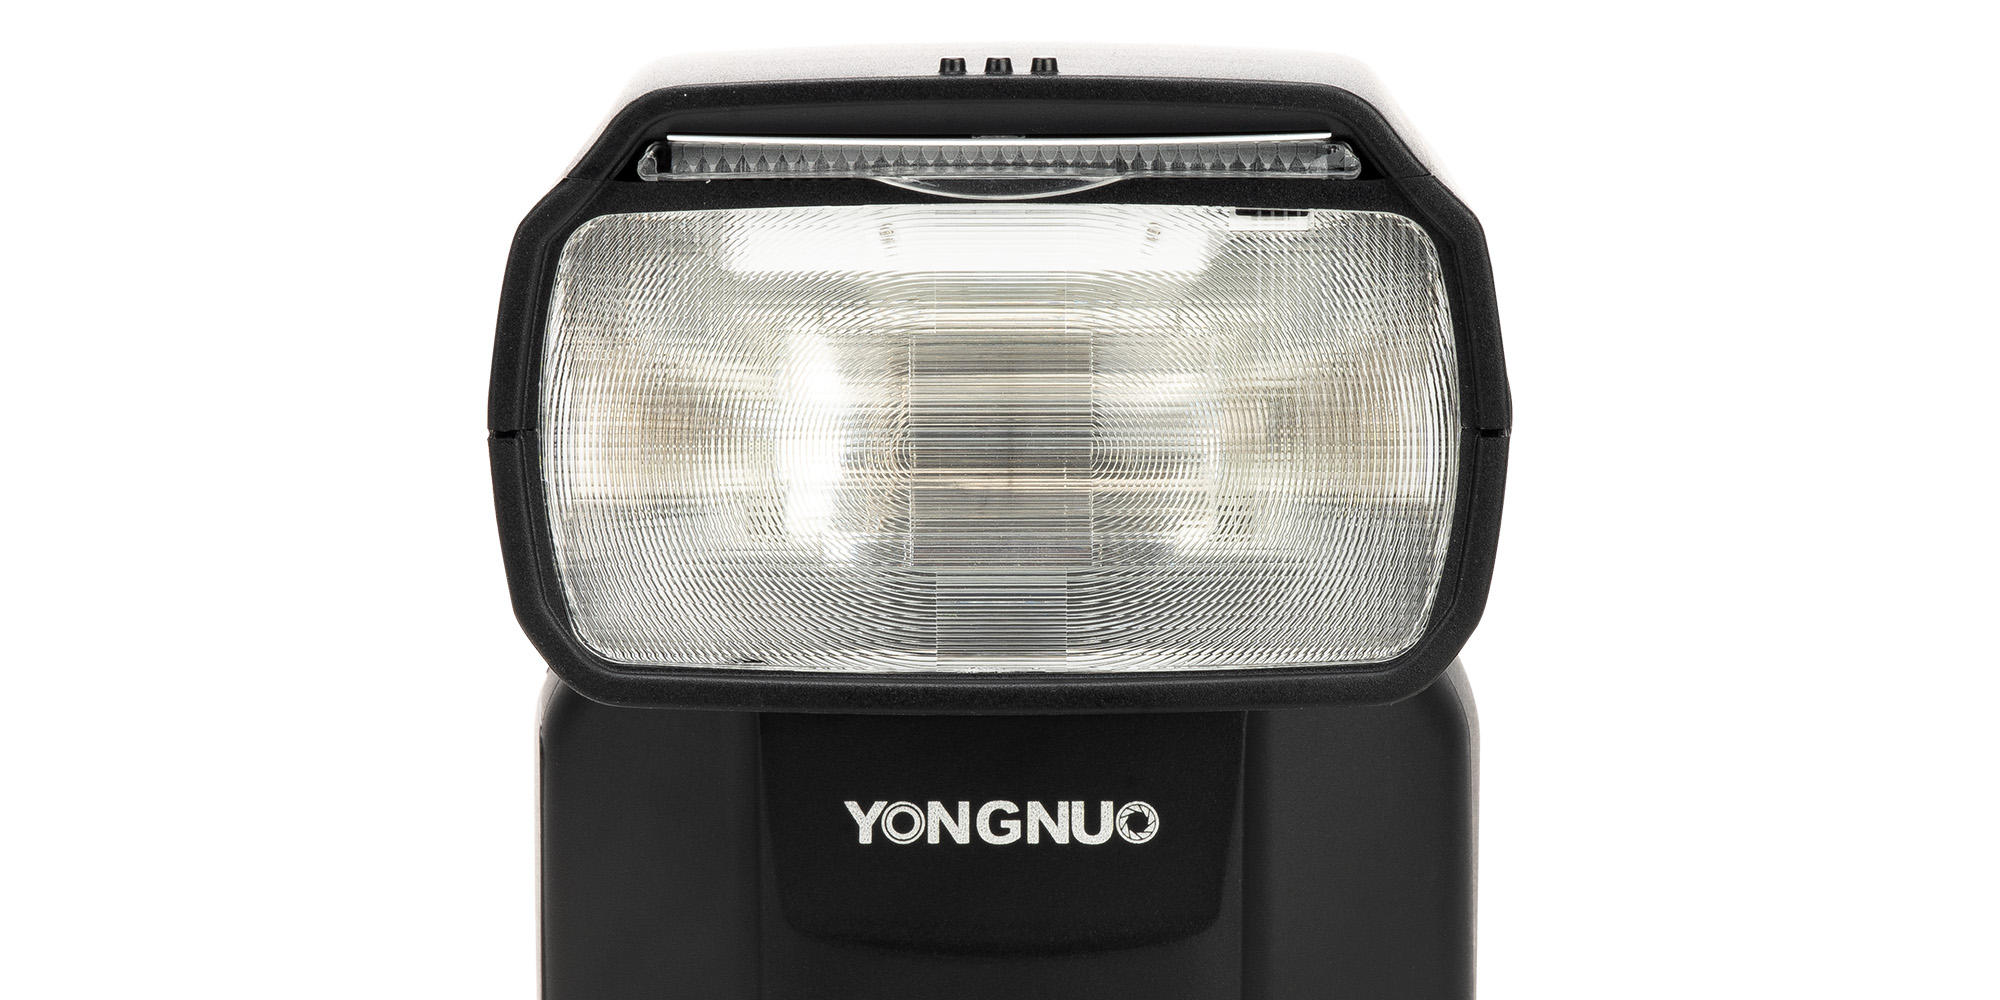 Yongnuo YN690EX-RT Flash for Canon - Instant Response Time